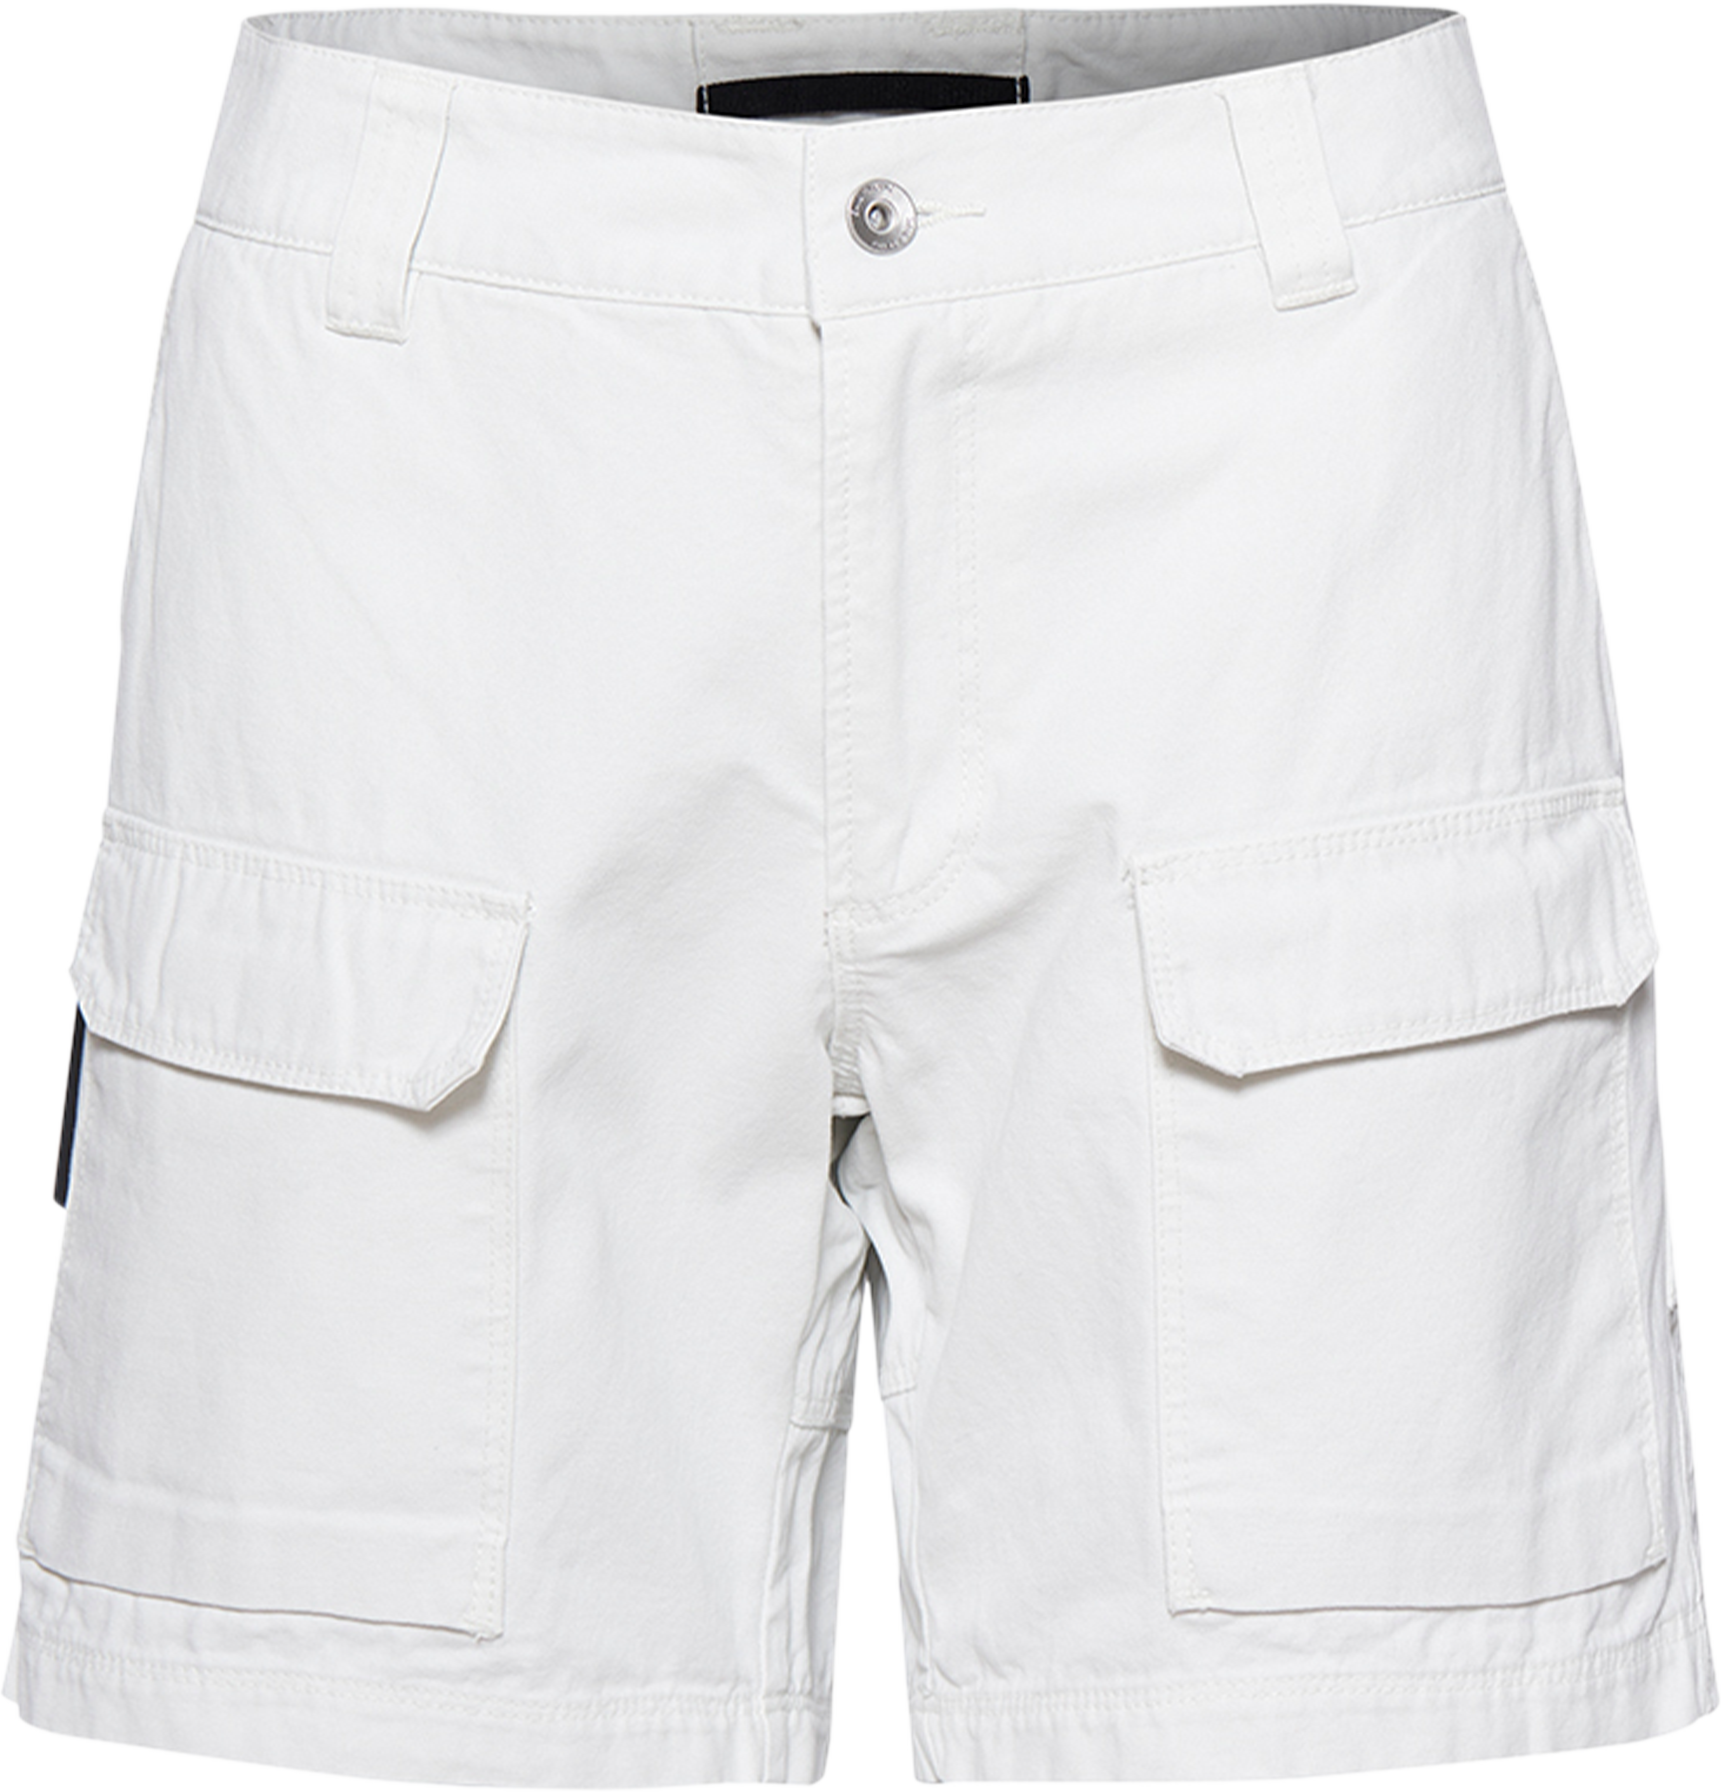 Sail Racing Women’s Gale Shorts Storm White